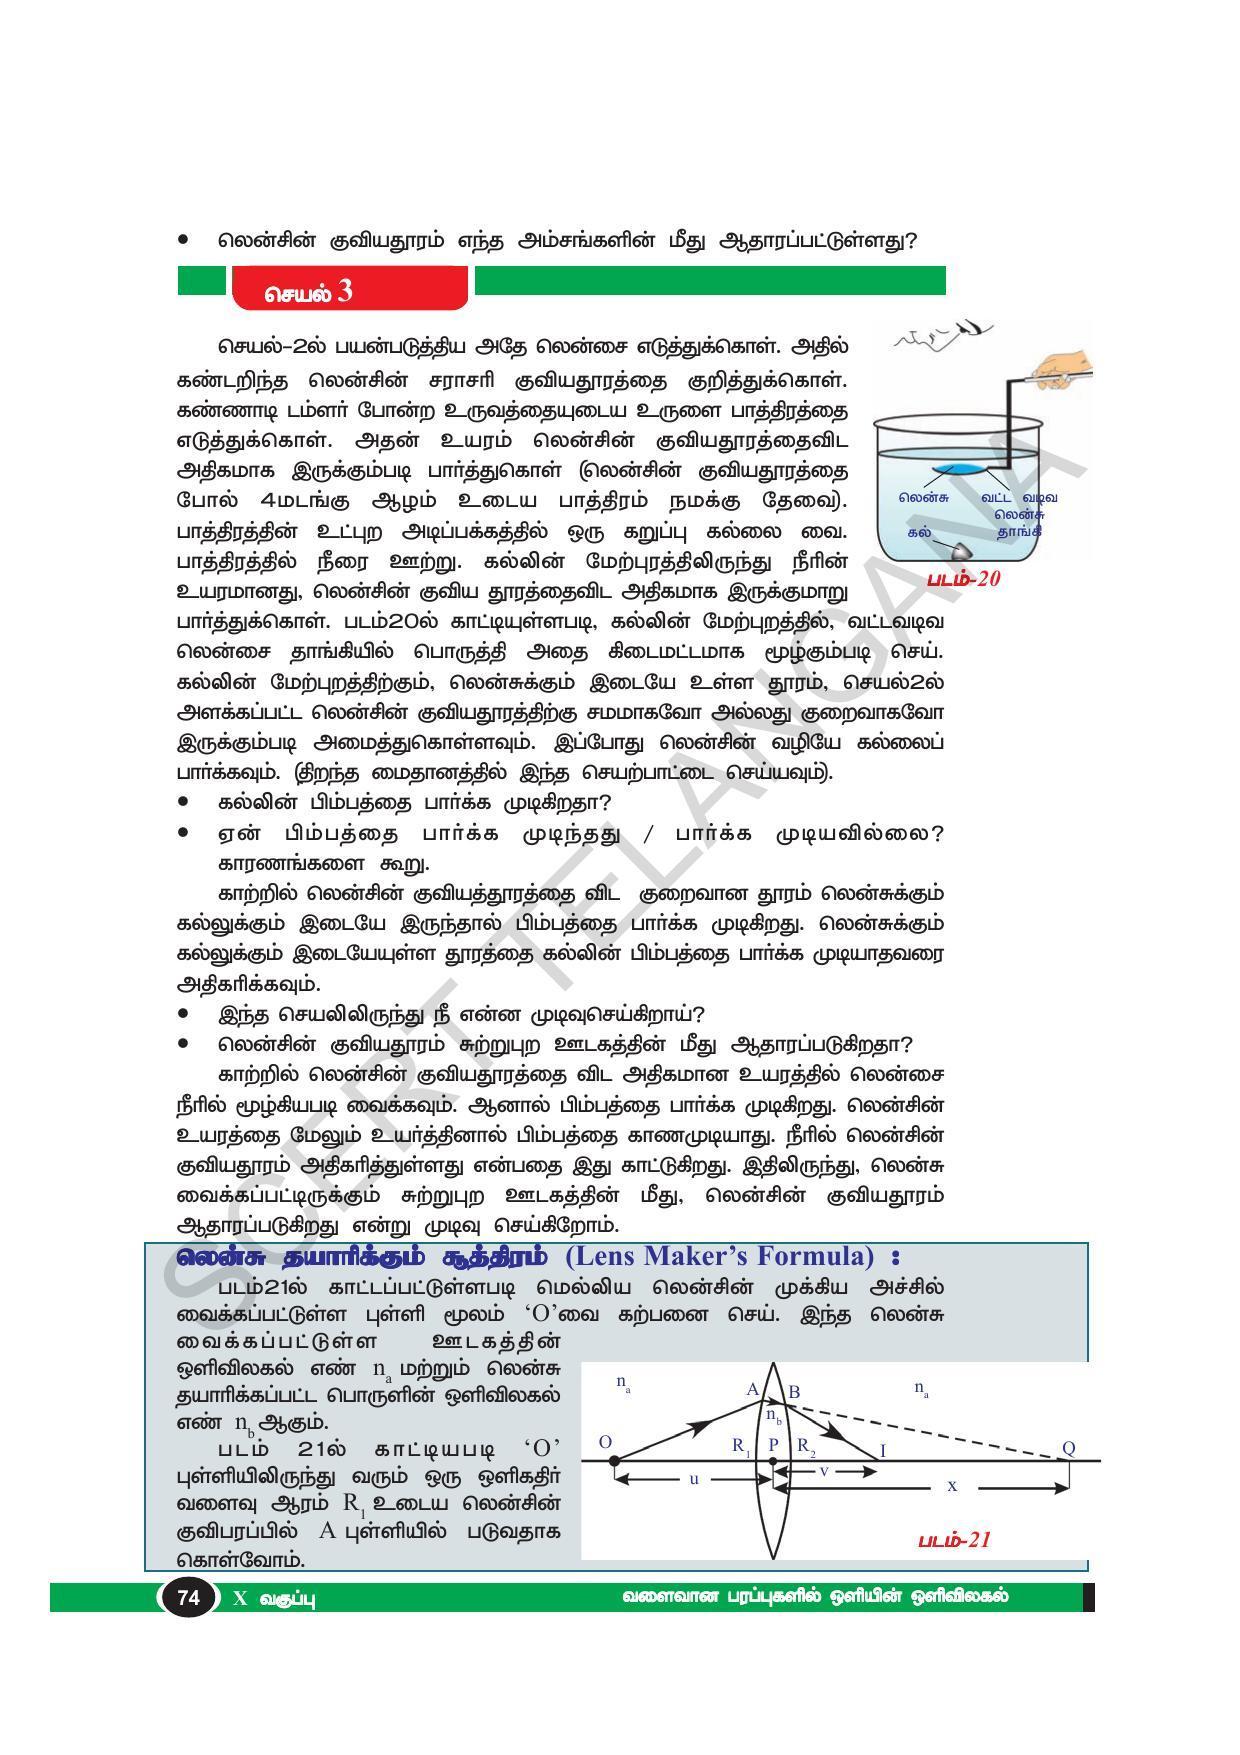 TS SCERT Class 10 Physical Science(Tamil Medium) Text Book - Page 86